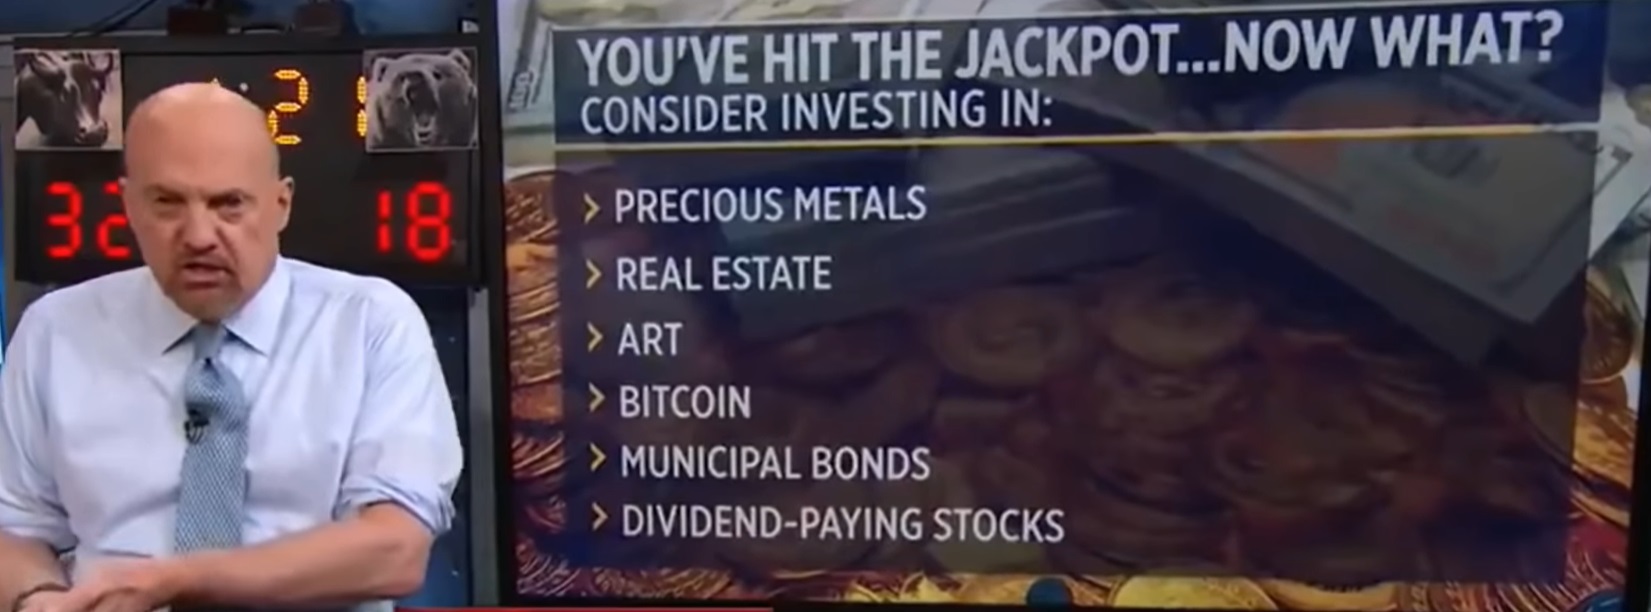 Jim Cramer’s recommended investments